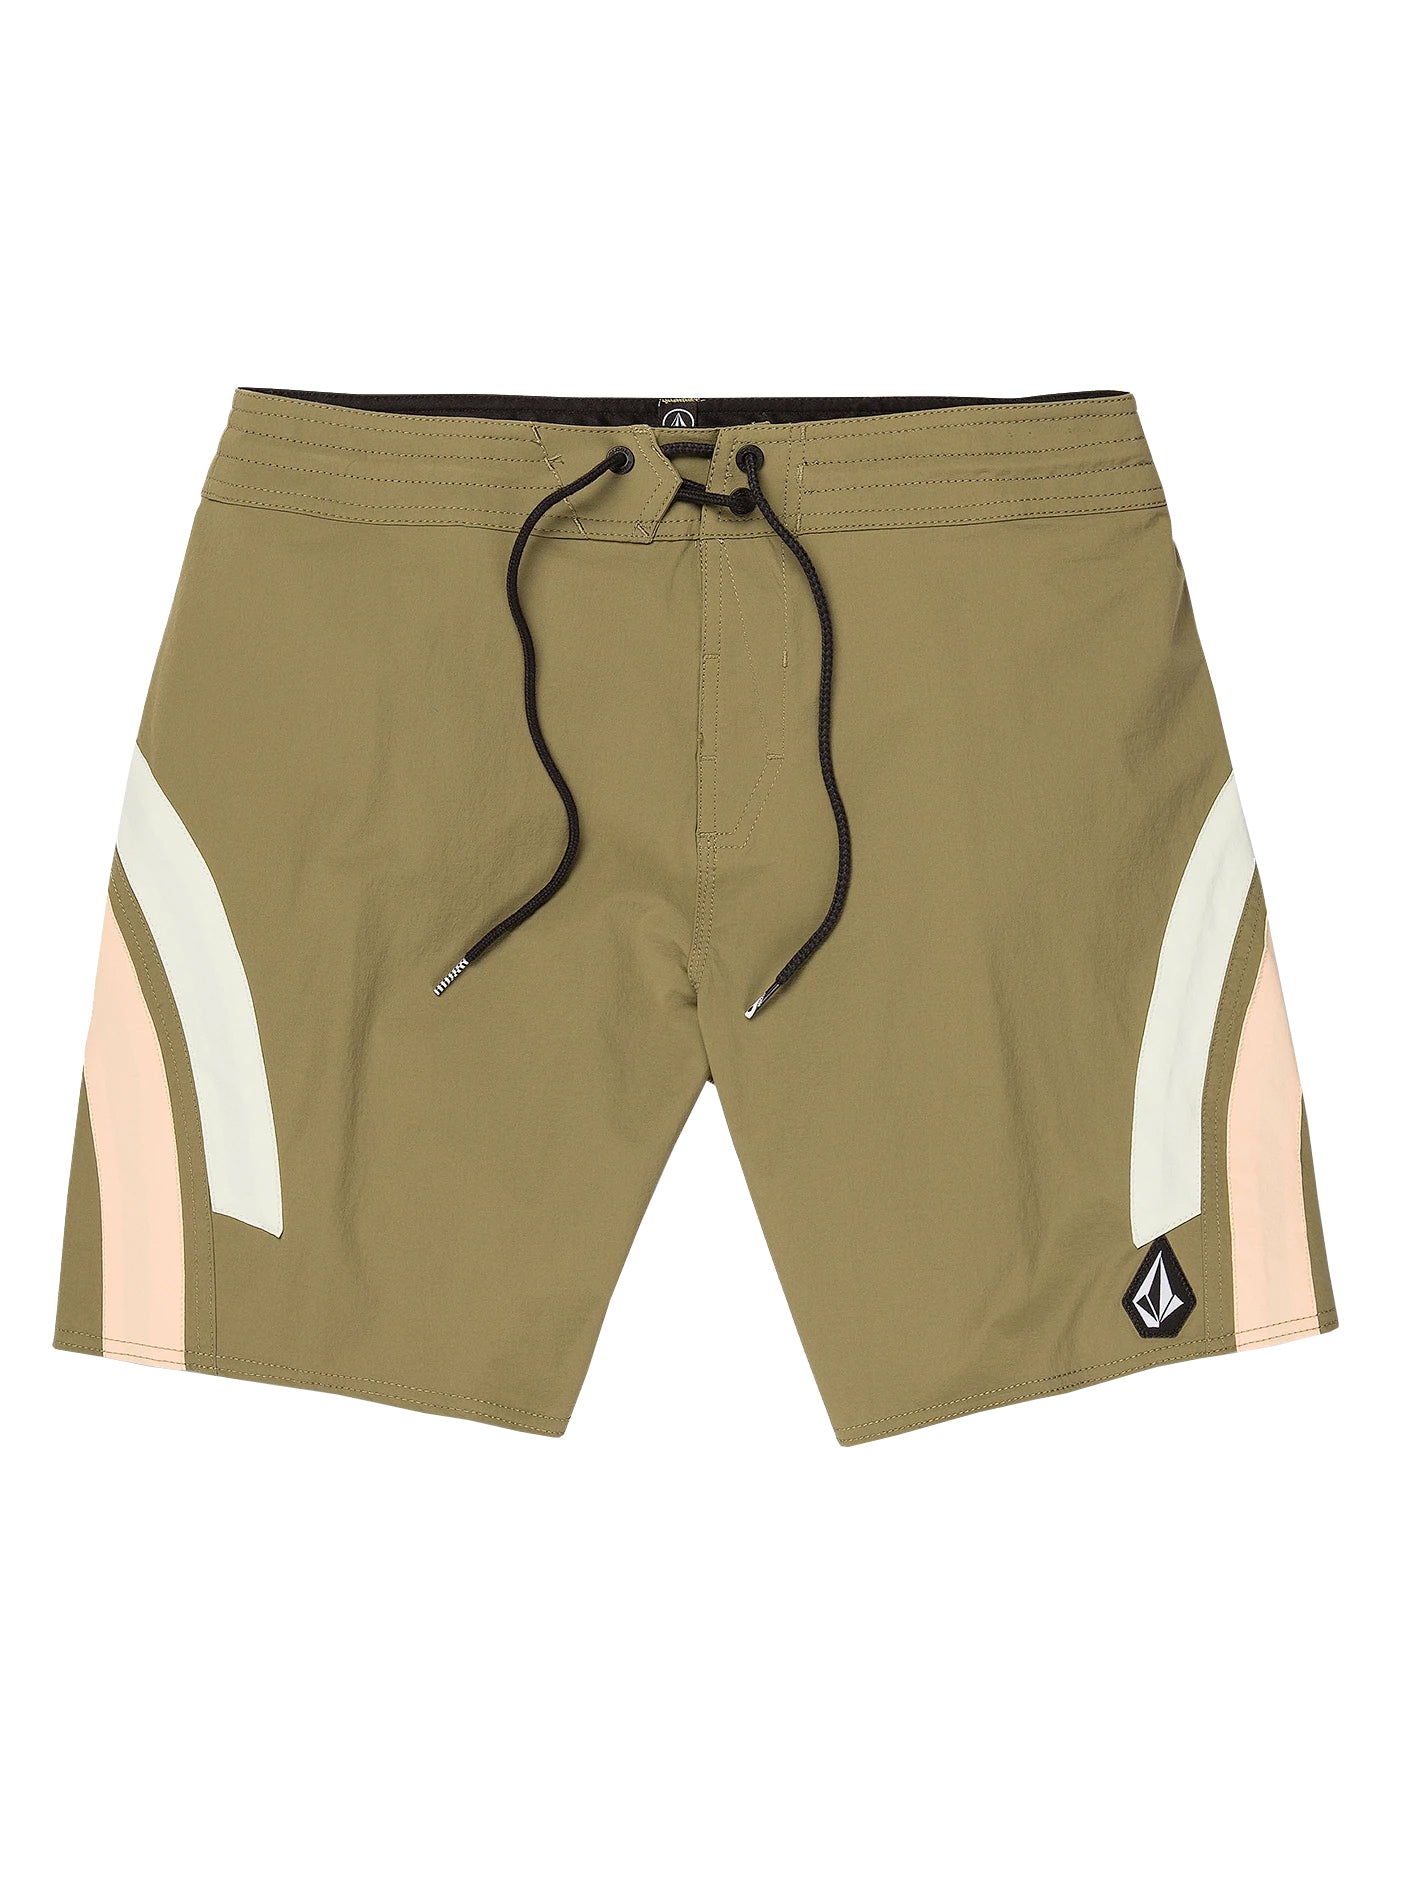 Volcom Arched Liberator Trunks MTO 30